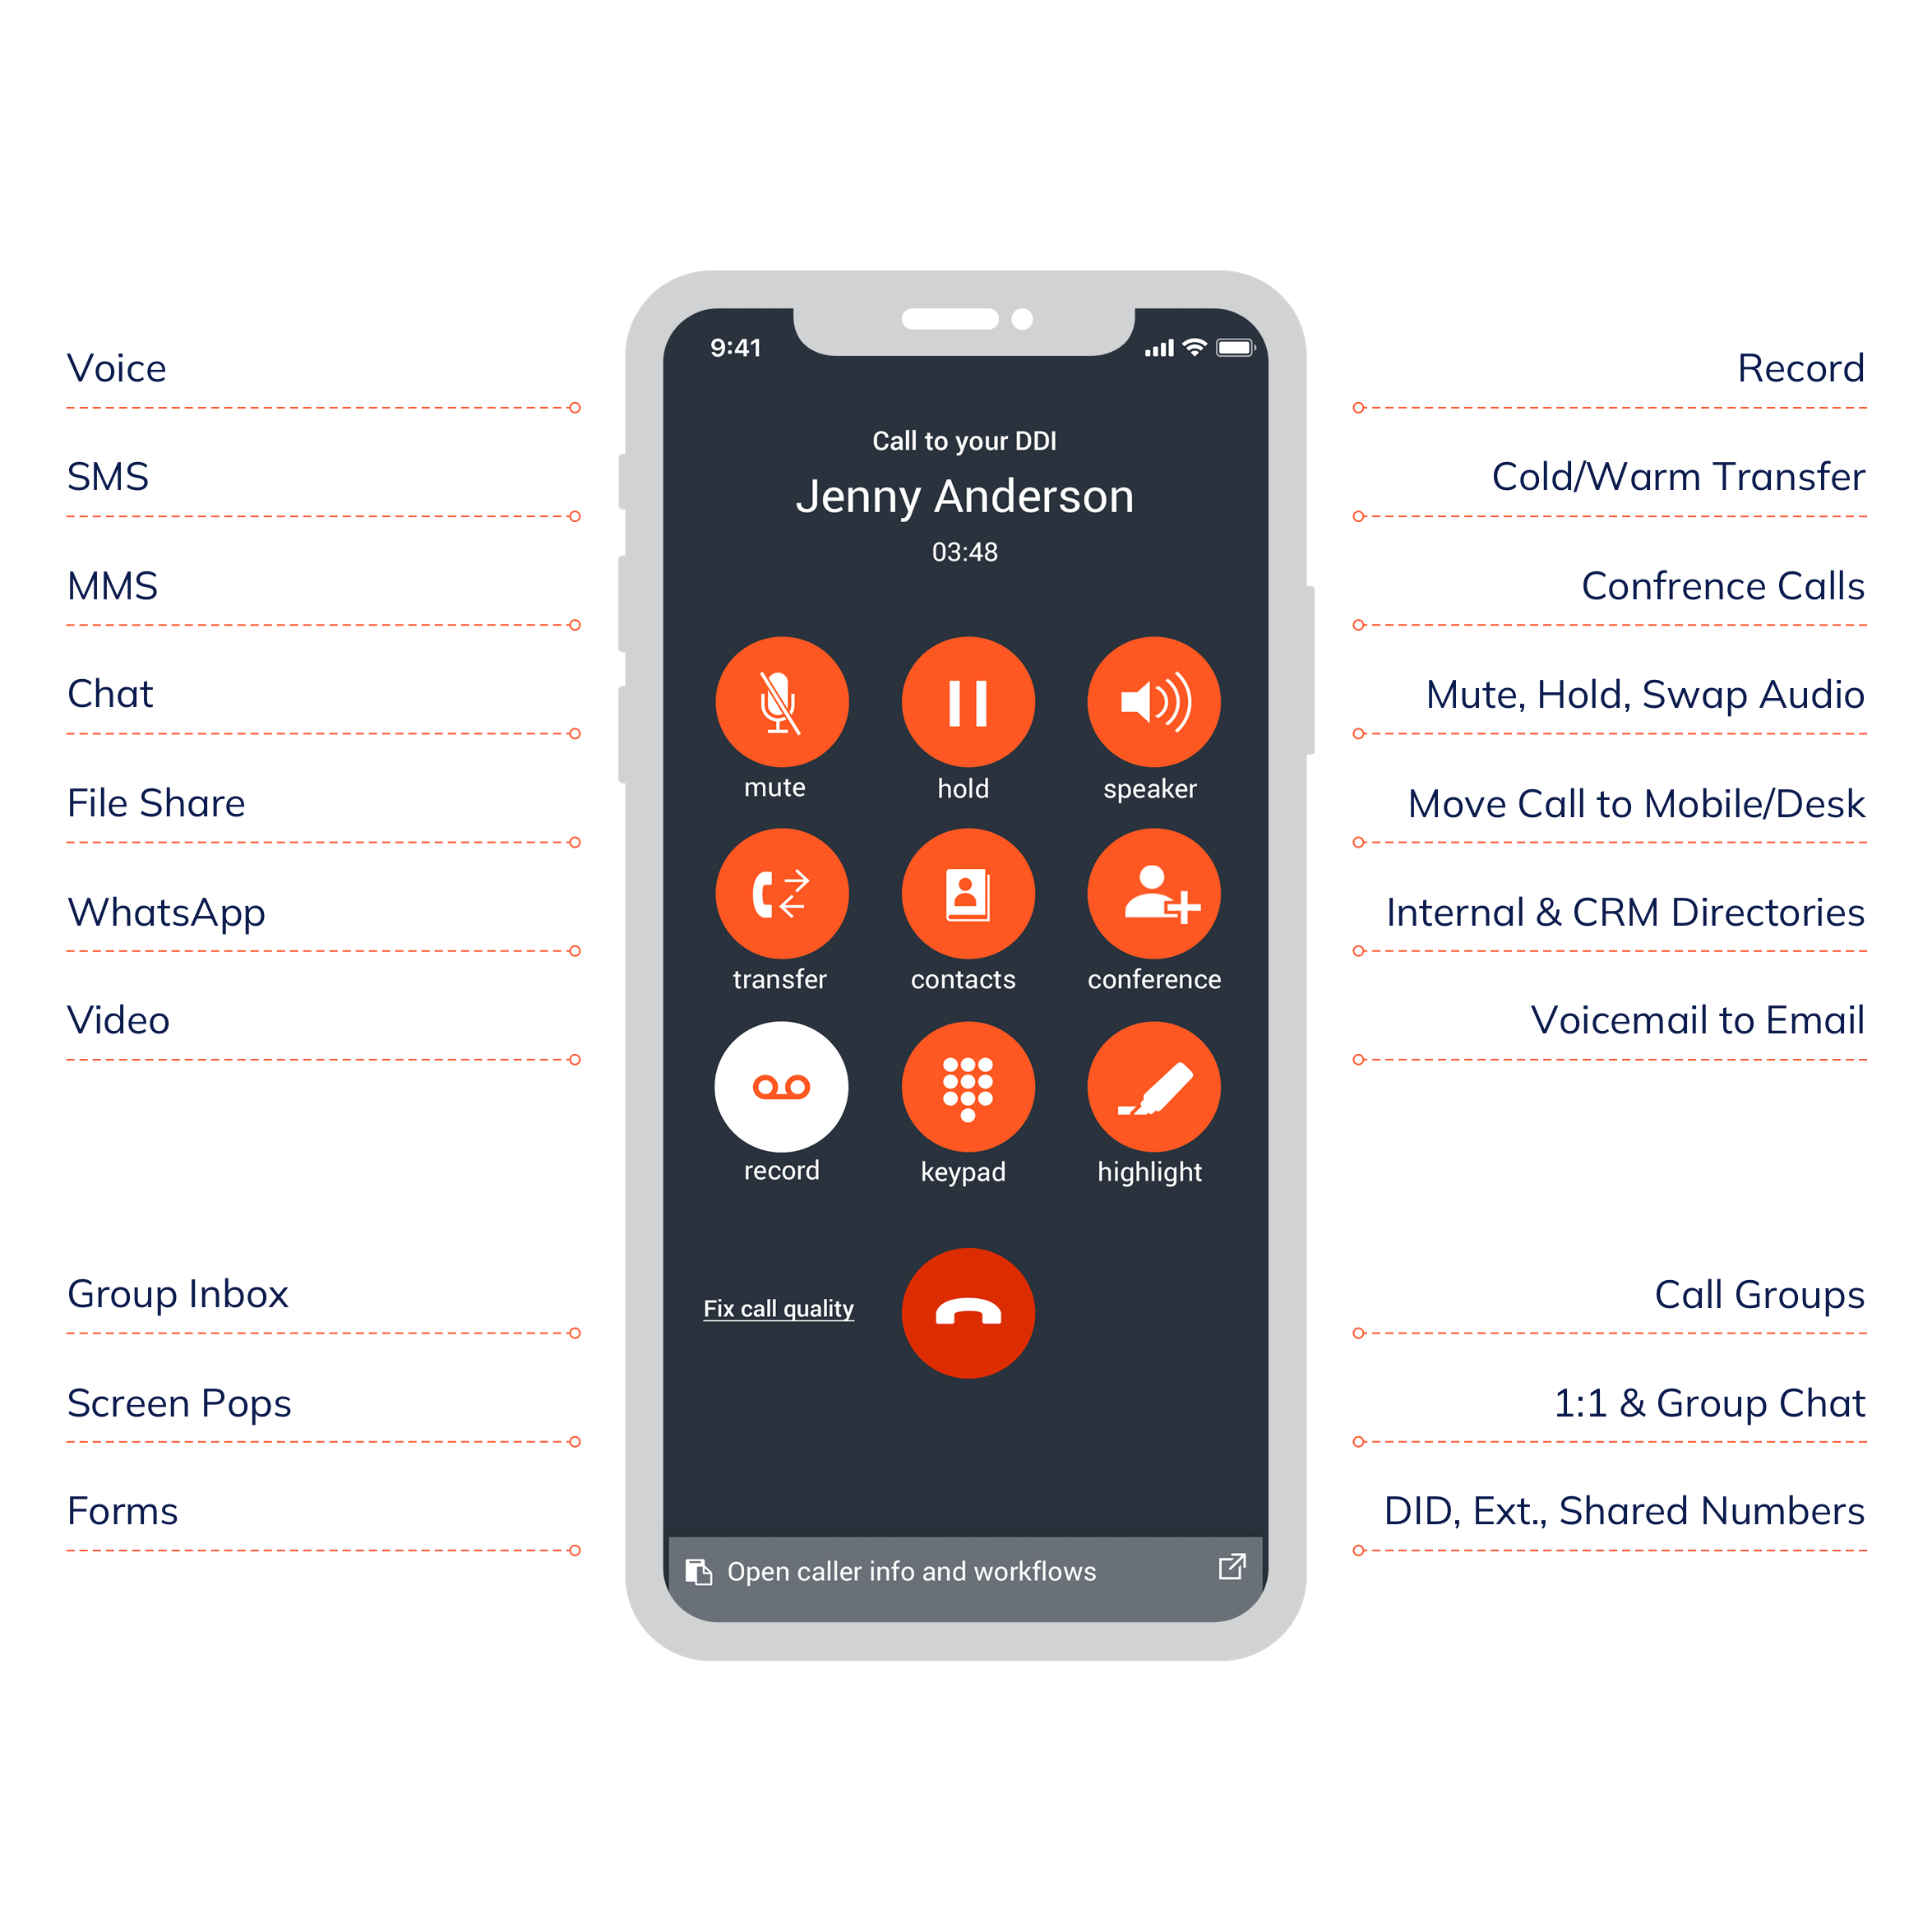 Spoke Phone Cloud Business Phone System Core Features — Calls, SMS, WhatsApp, Team Inbox, Group Messaging +more